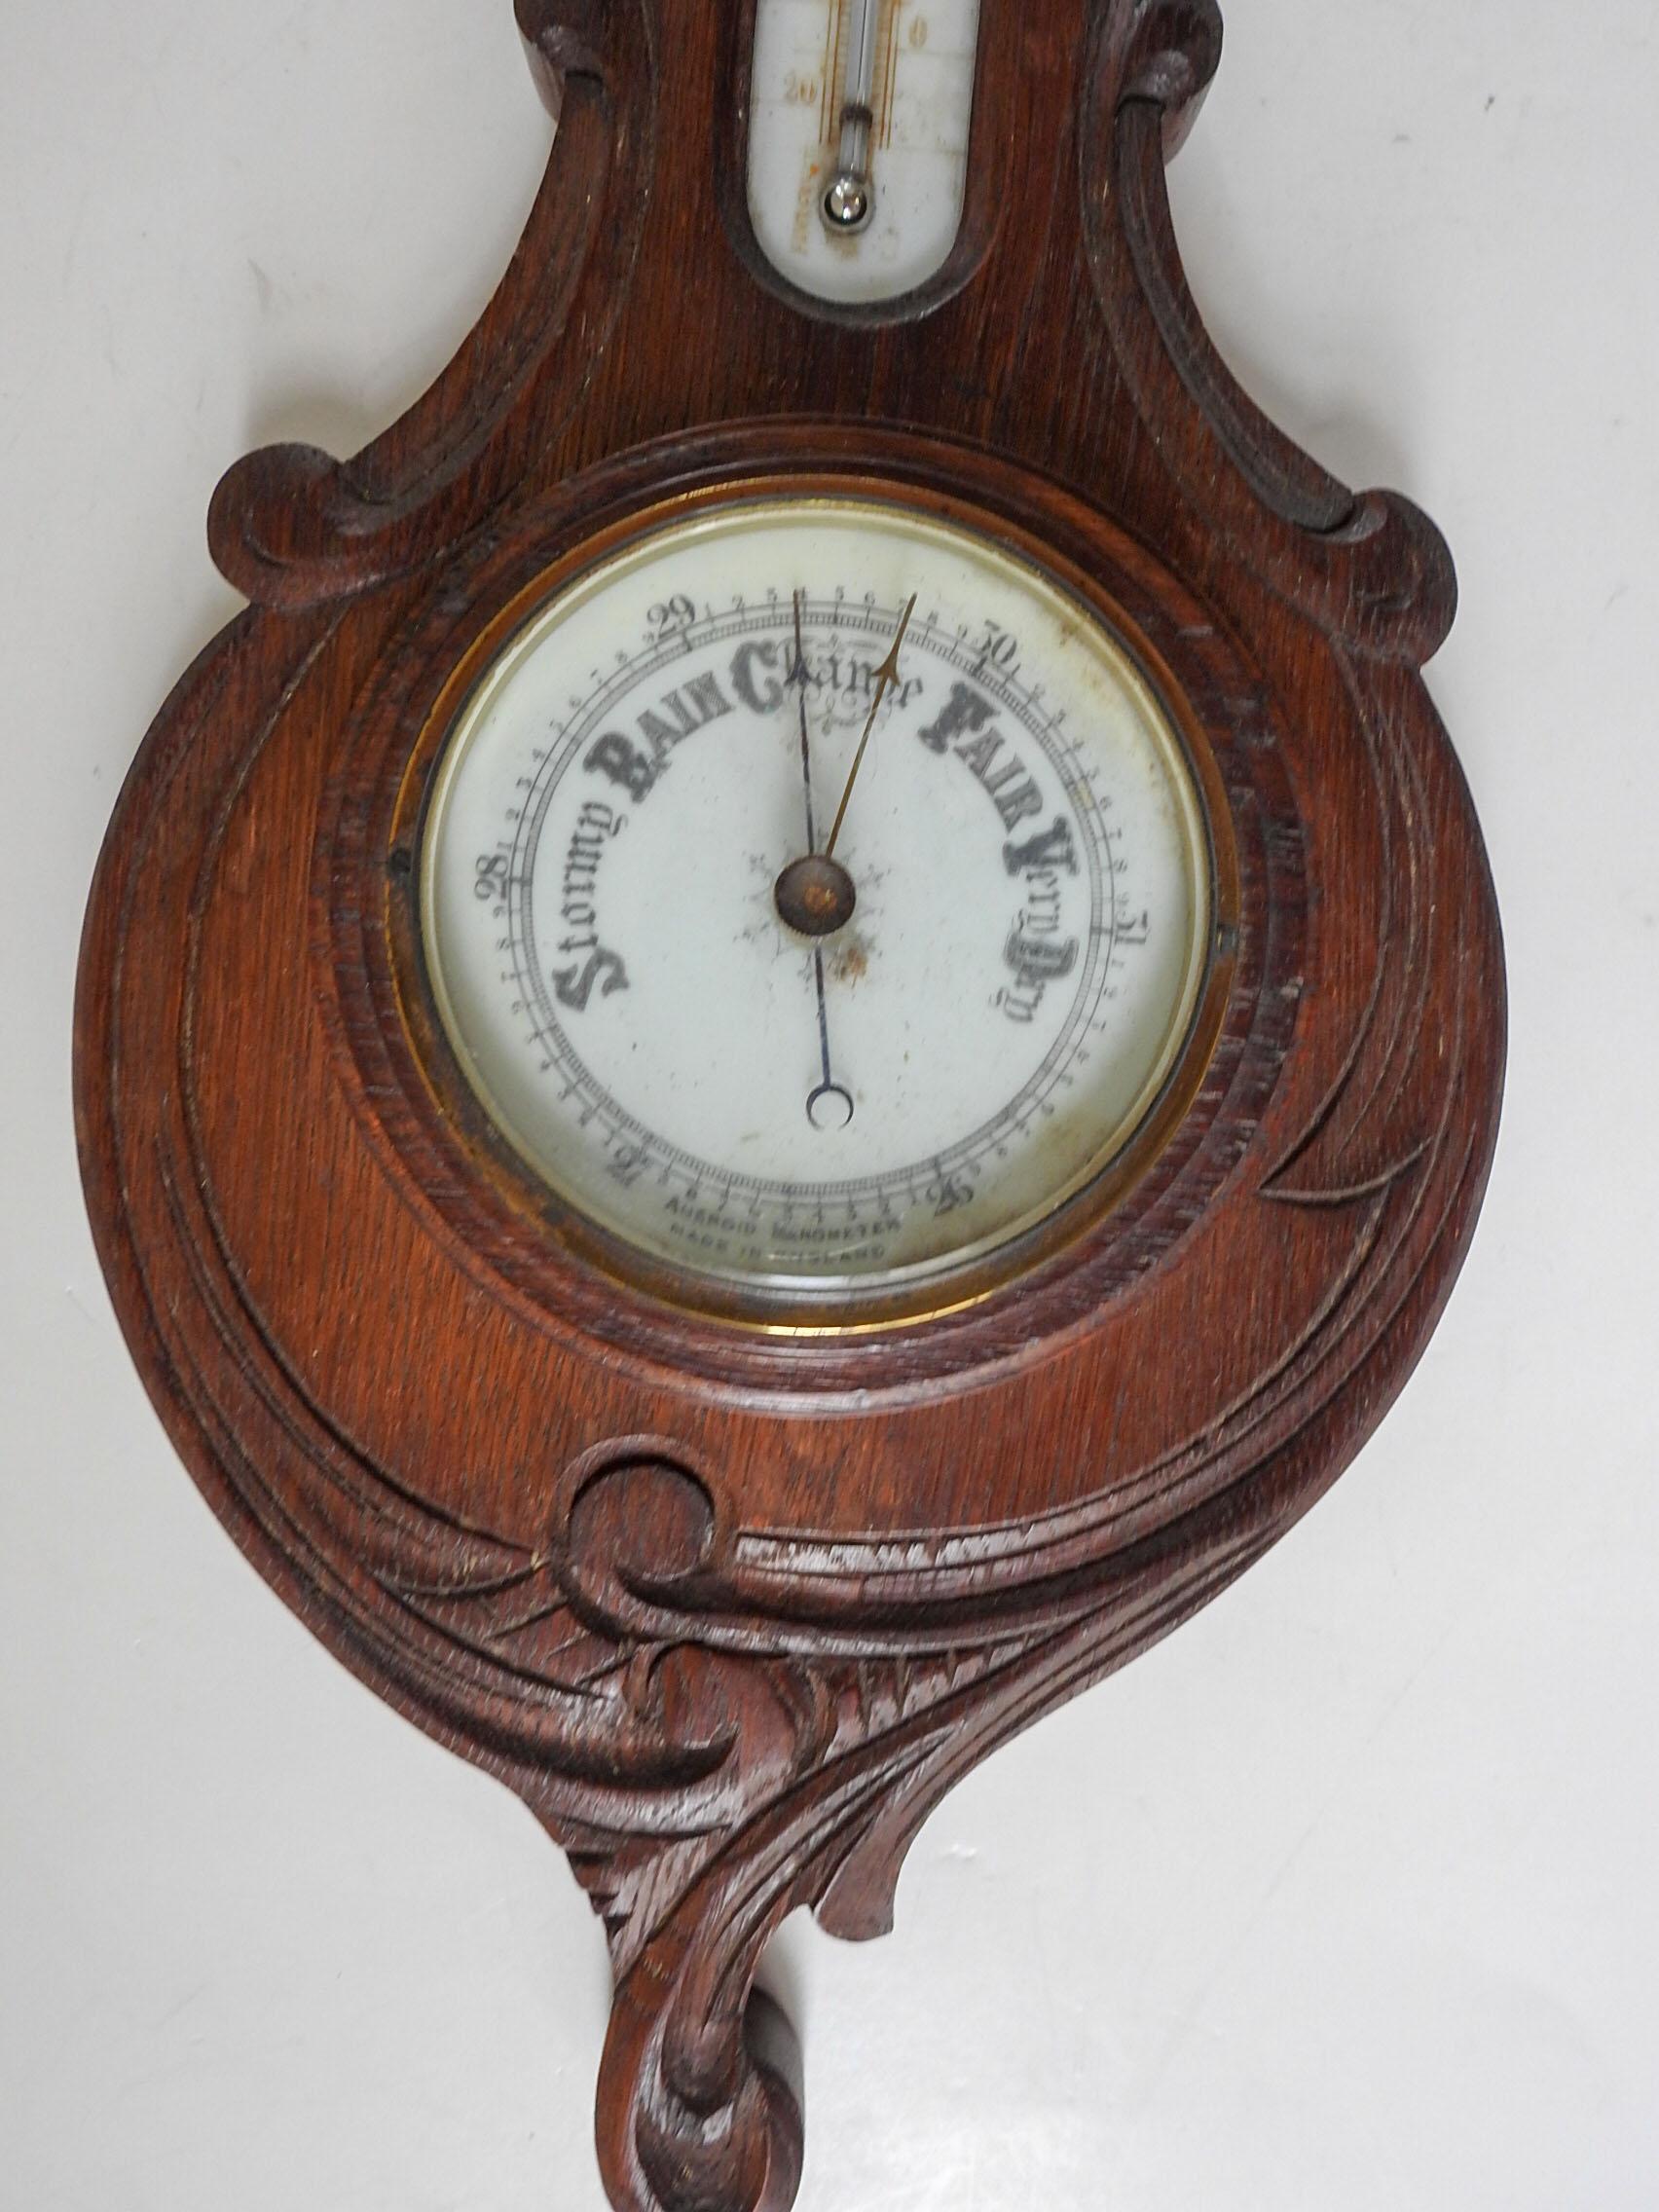 Antique circa 1900 aneroid barometer and thermometer.  Made in England, carved oak case, banjo shaped with white porcelain dials, beveled glass cover, on barometer. Thermometer works, not sure about barometer, but dial does change position.  Wear to